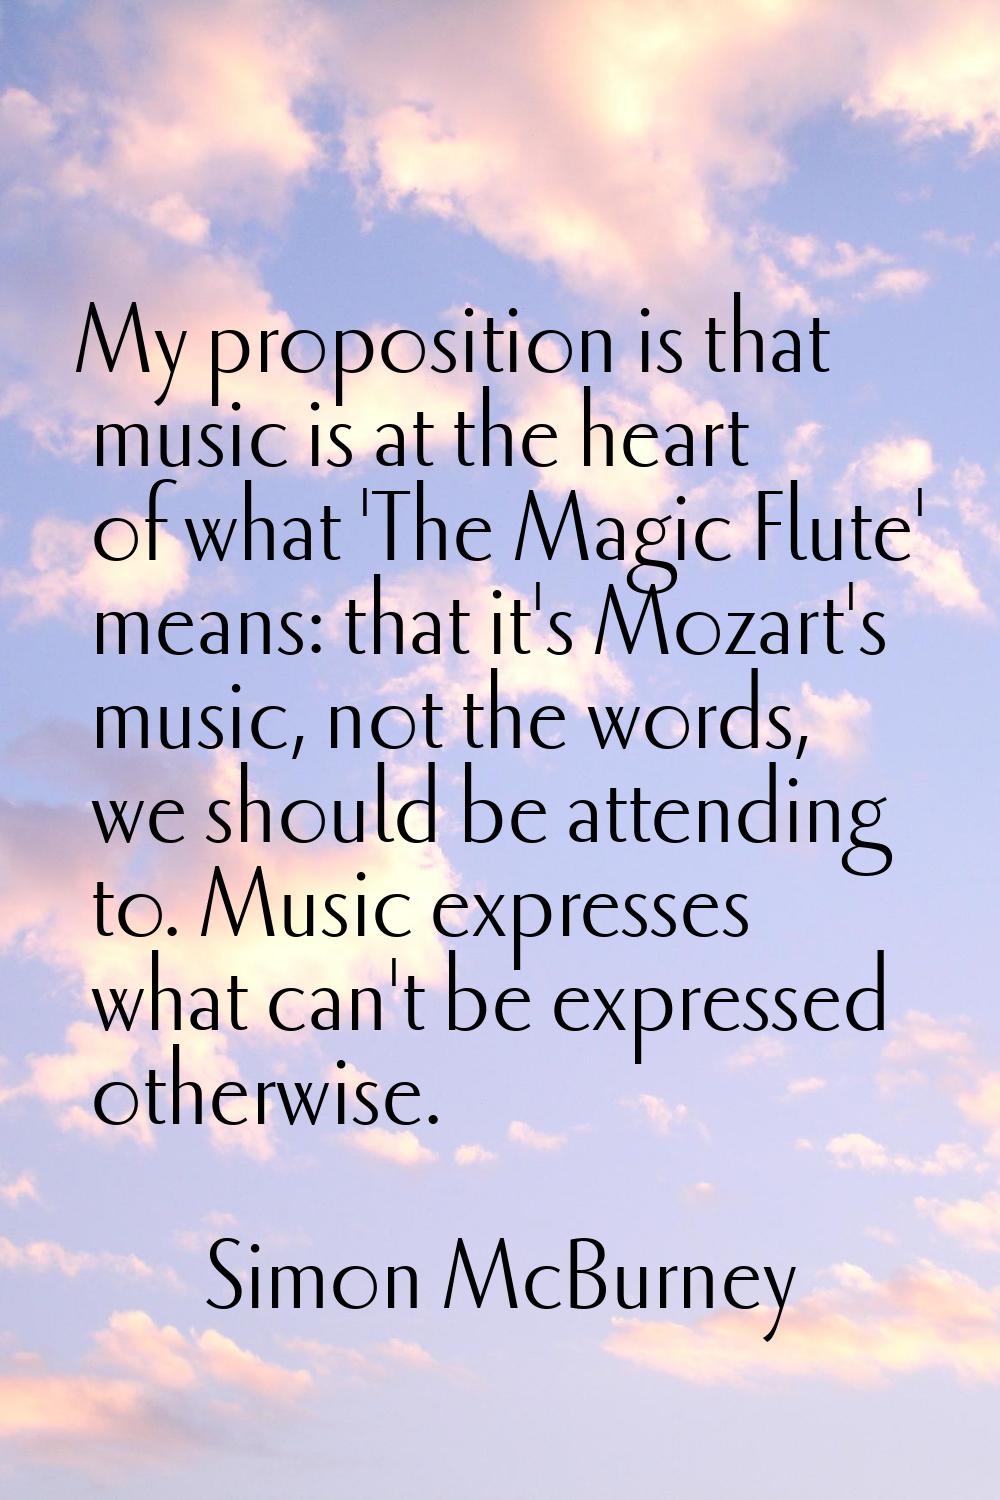 My proposition is that music is at the heart of what 'The Magic Flute' means: that it's Mozart's mu